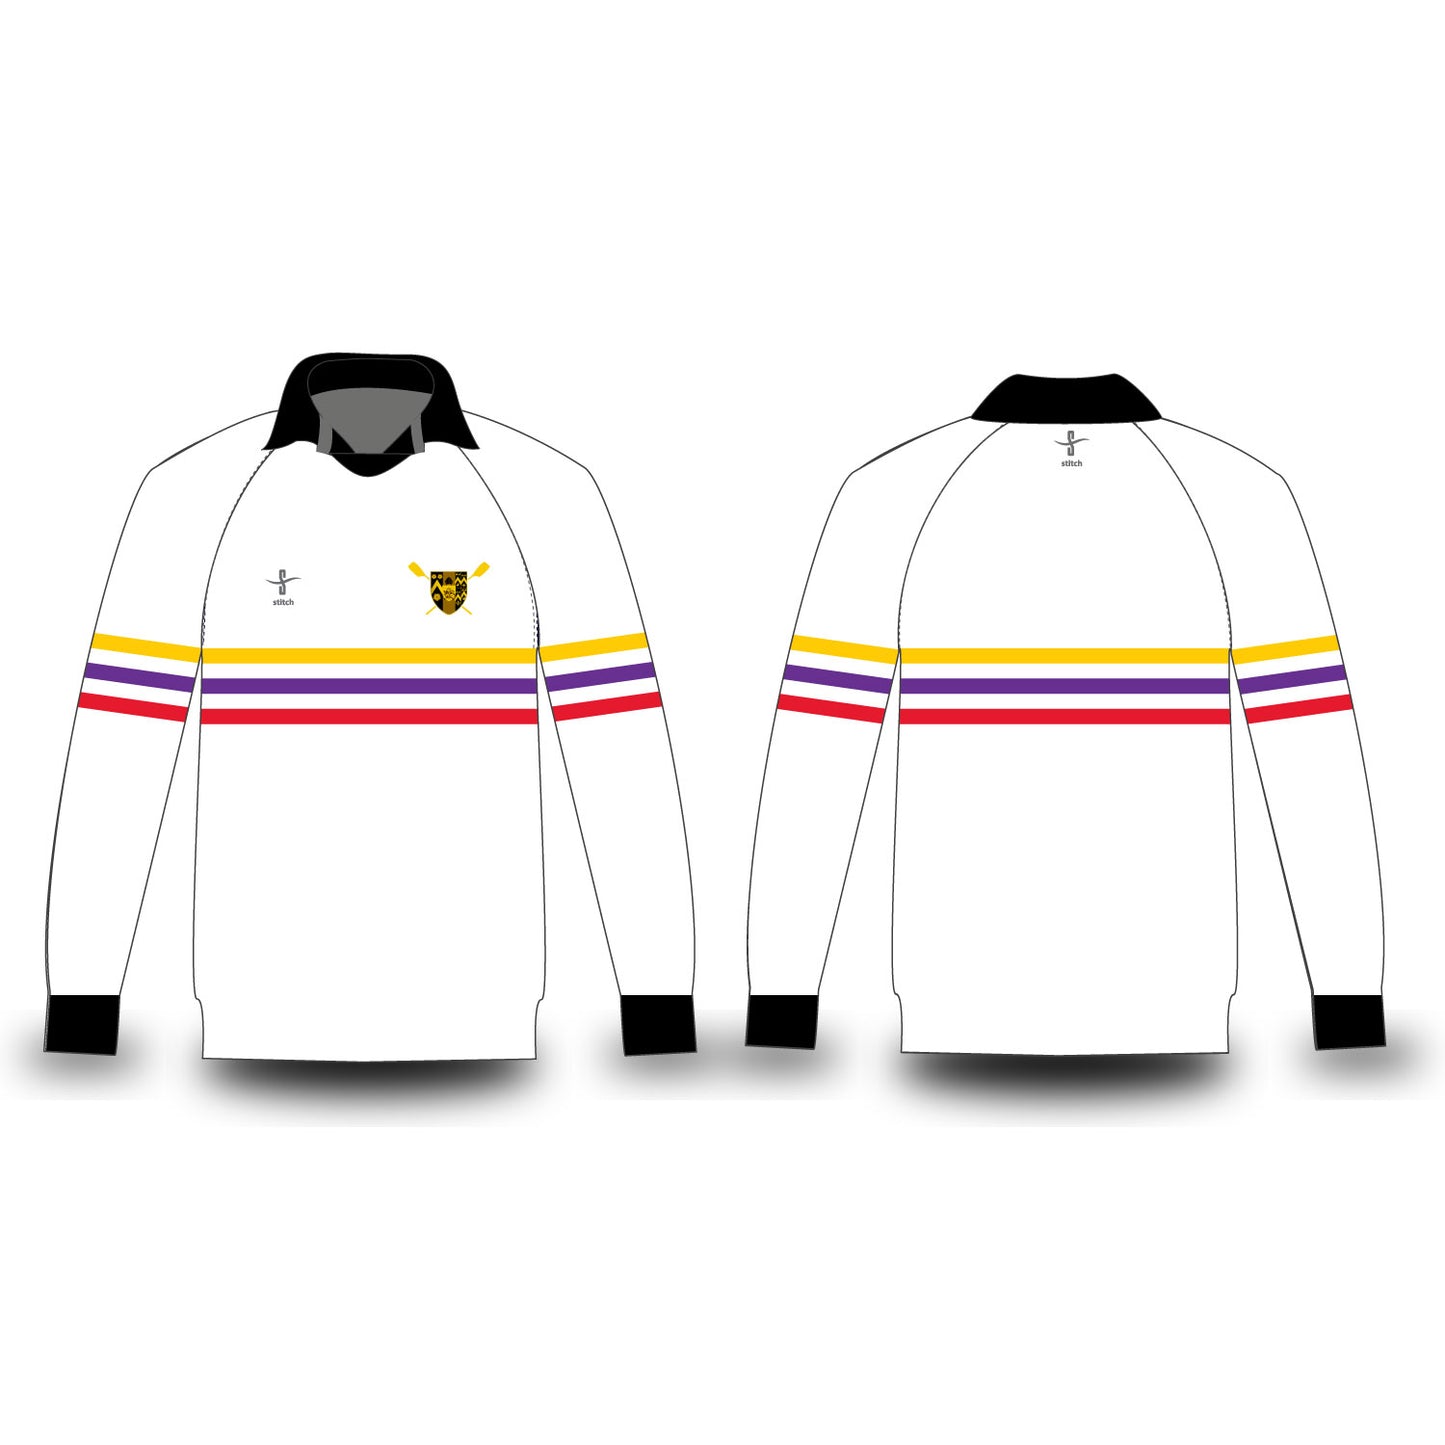 Brasenose College Rugby Shirt Option 2